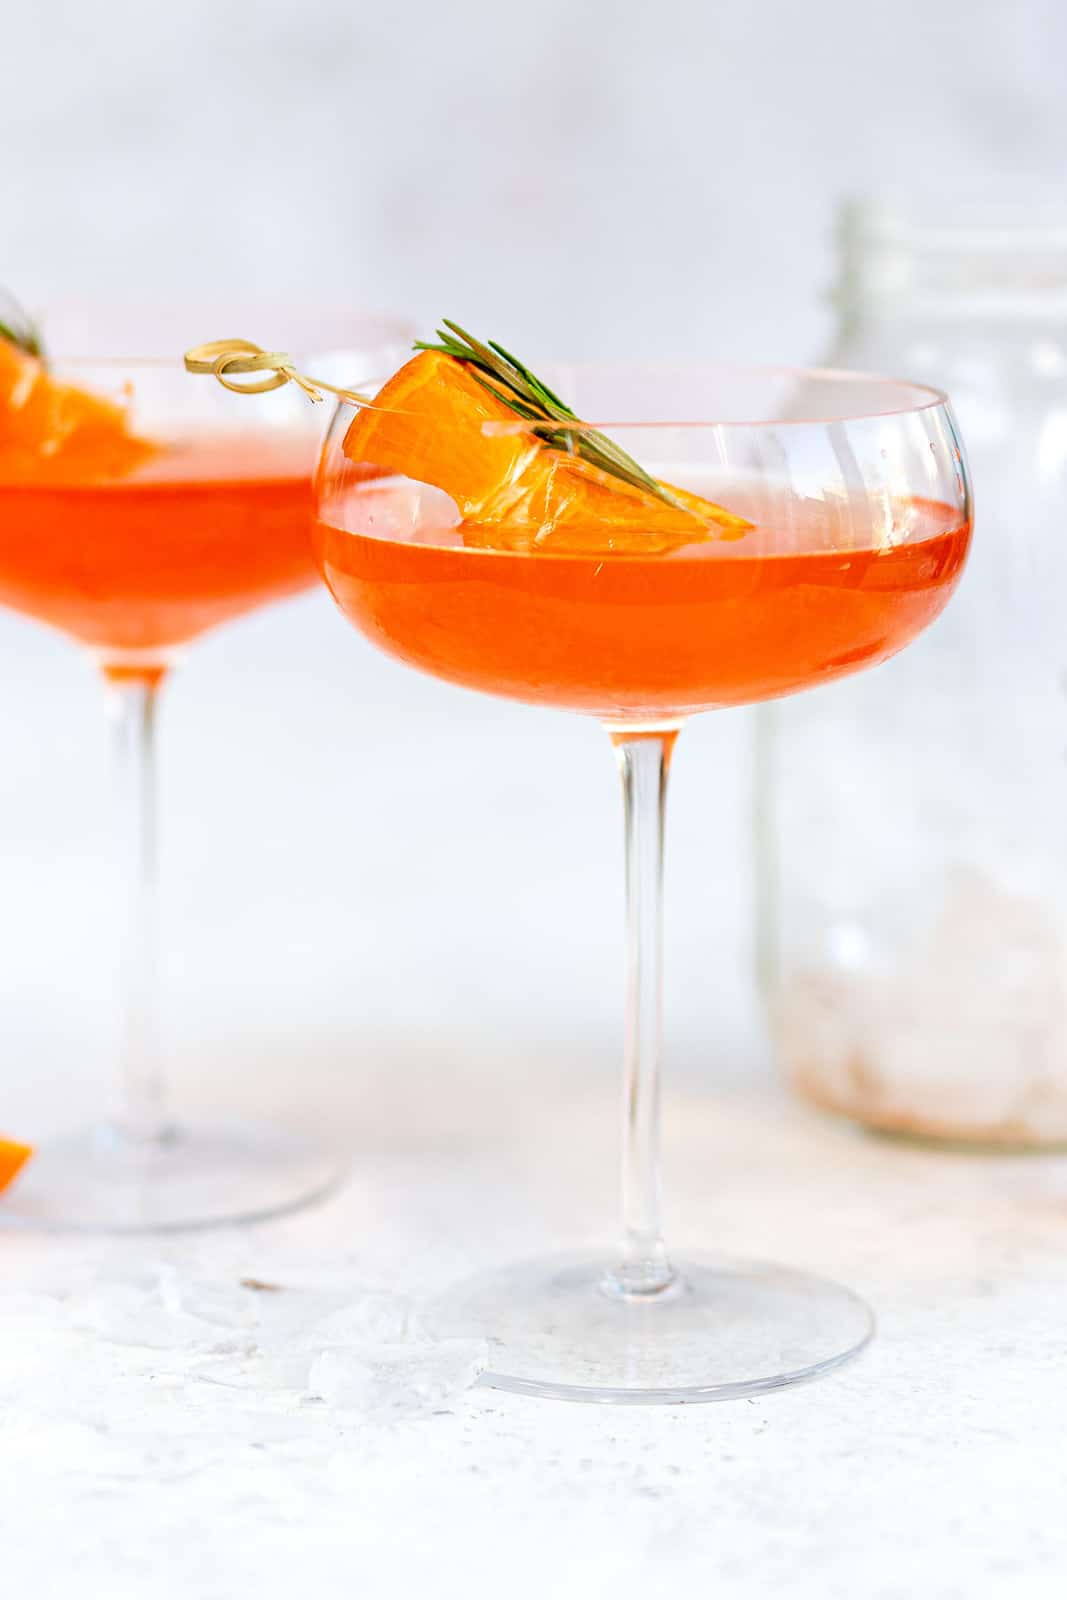 Cocktail with Aperol and tequila served in coupe glasses with orange garnish